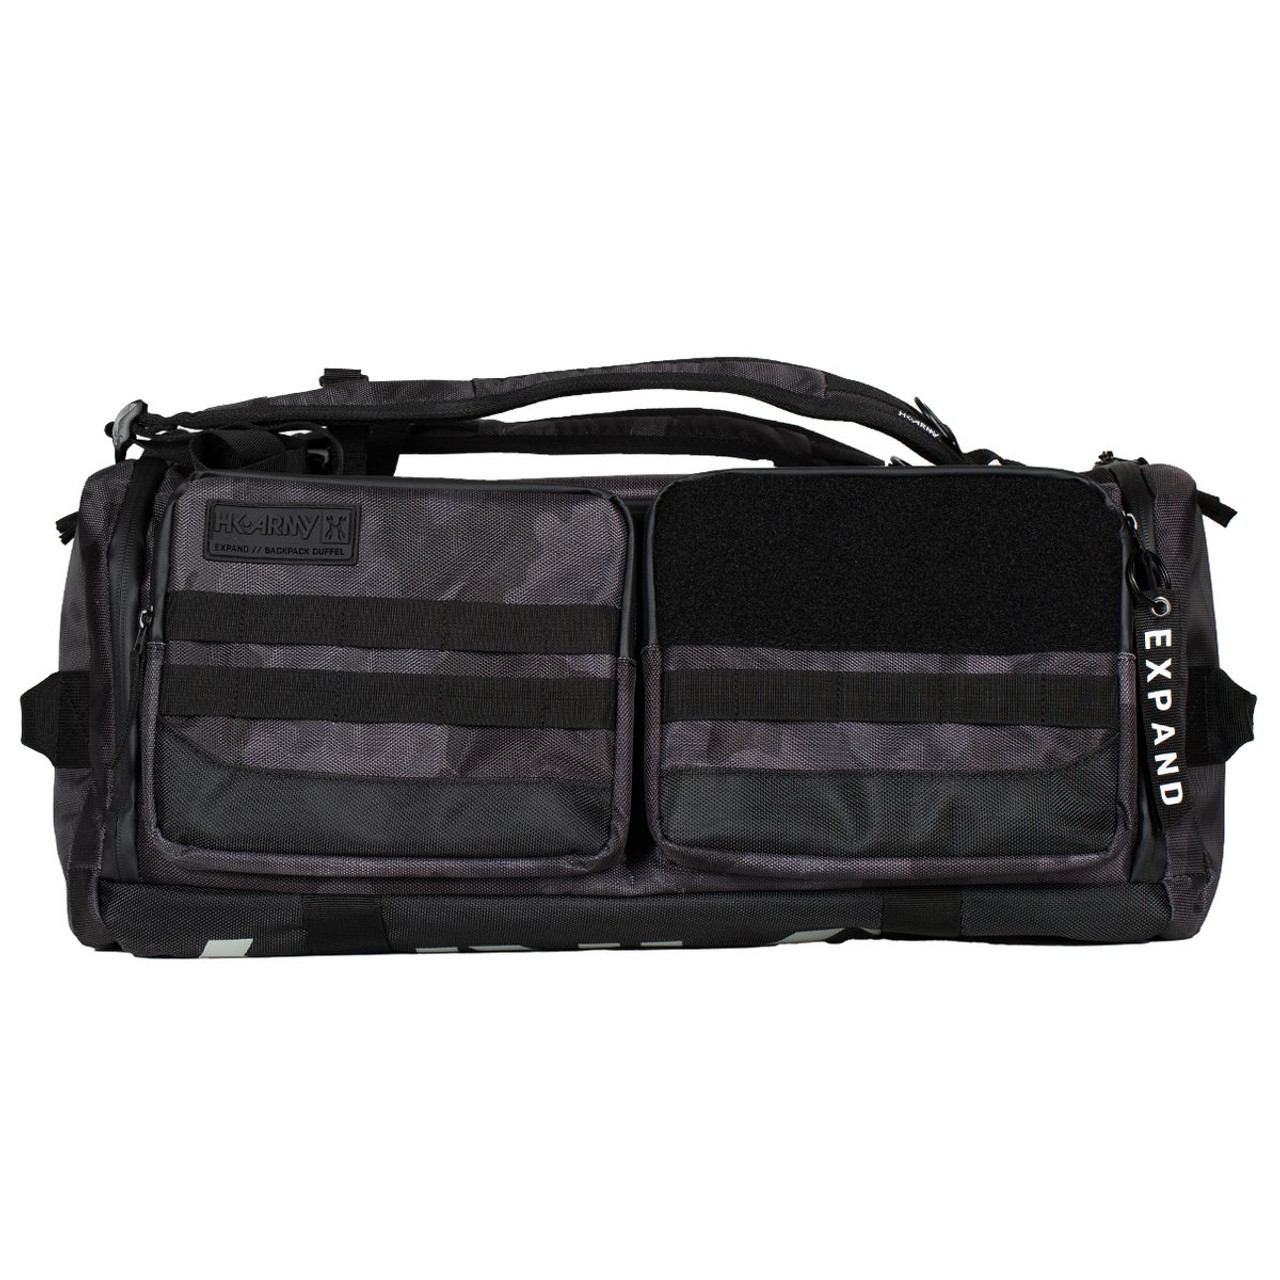 HK - Expand Backpack Gearbag - Shroud Blackout